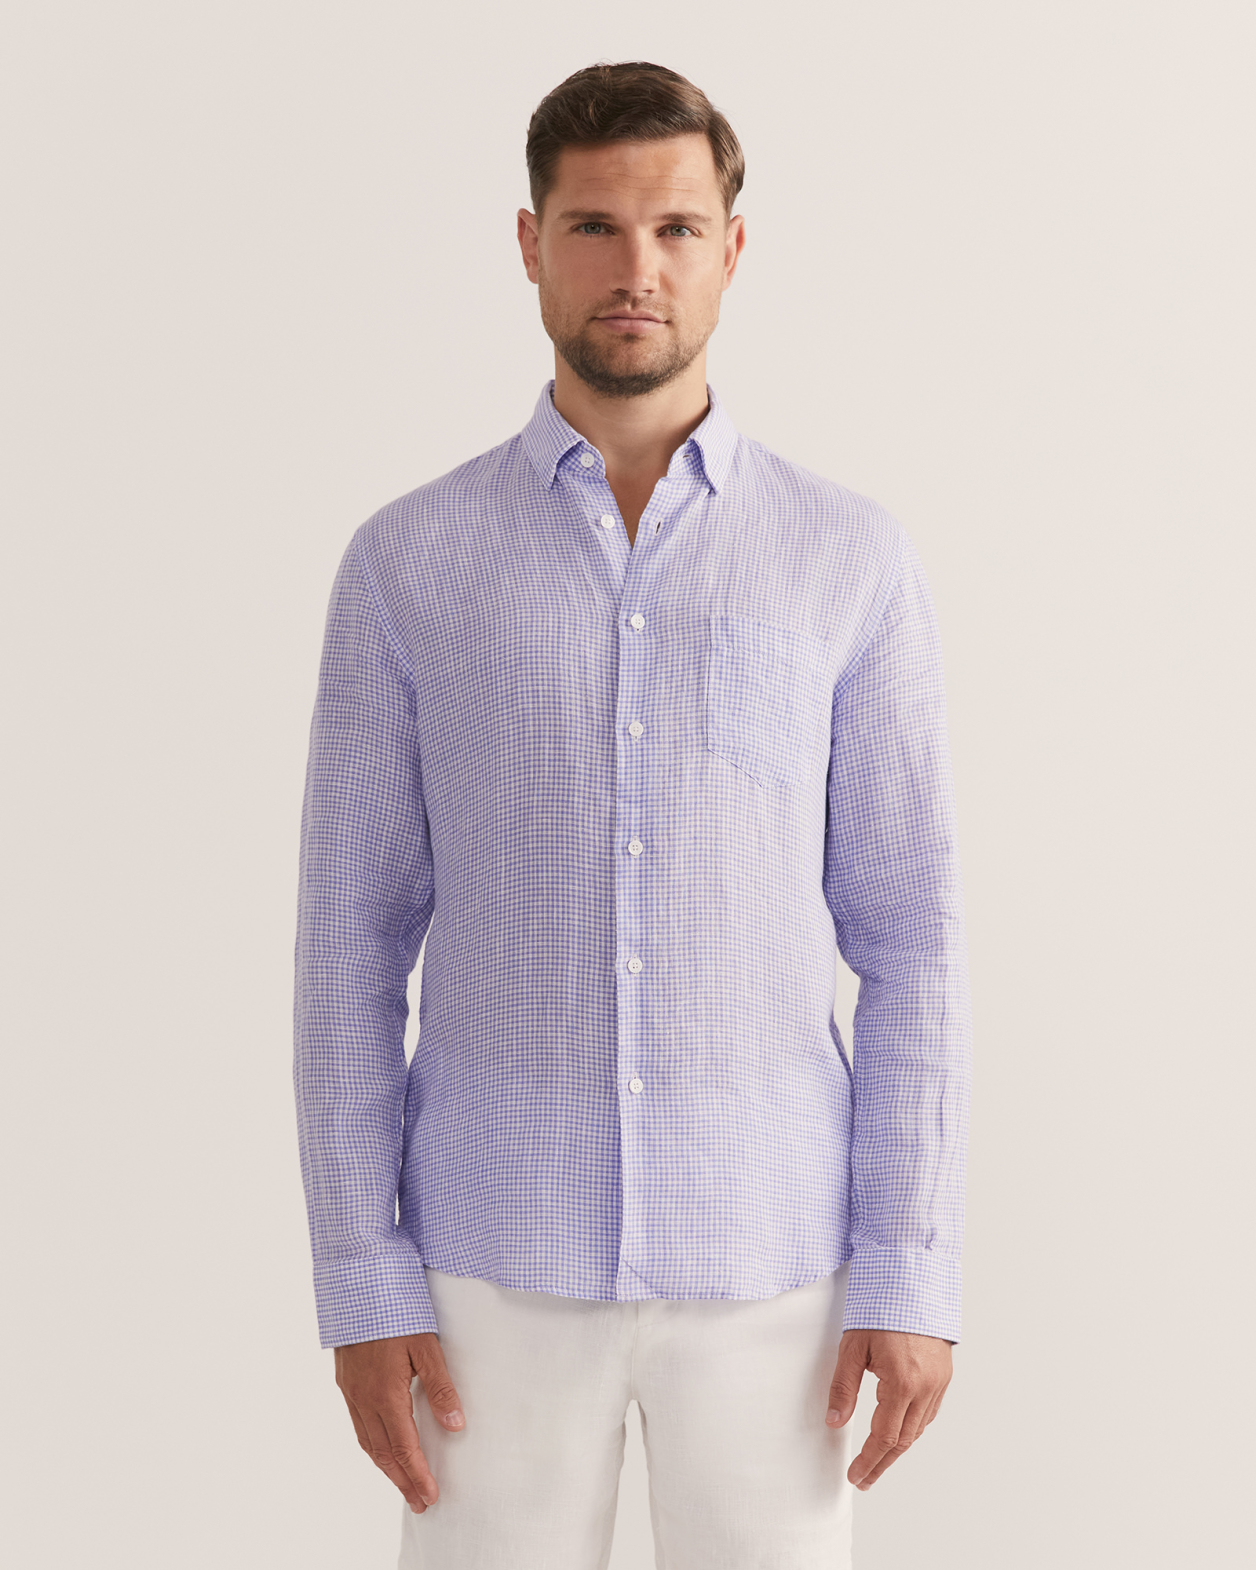 Anderson Long Sleeve Classic Check Shirt in PERIWINKLE